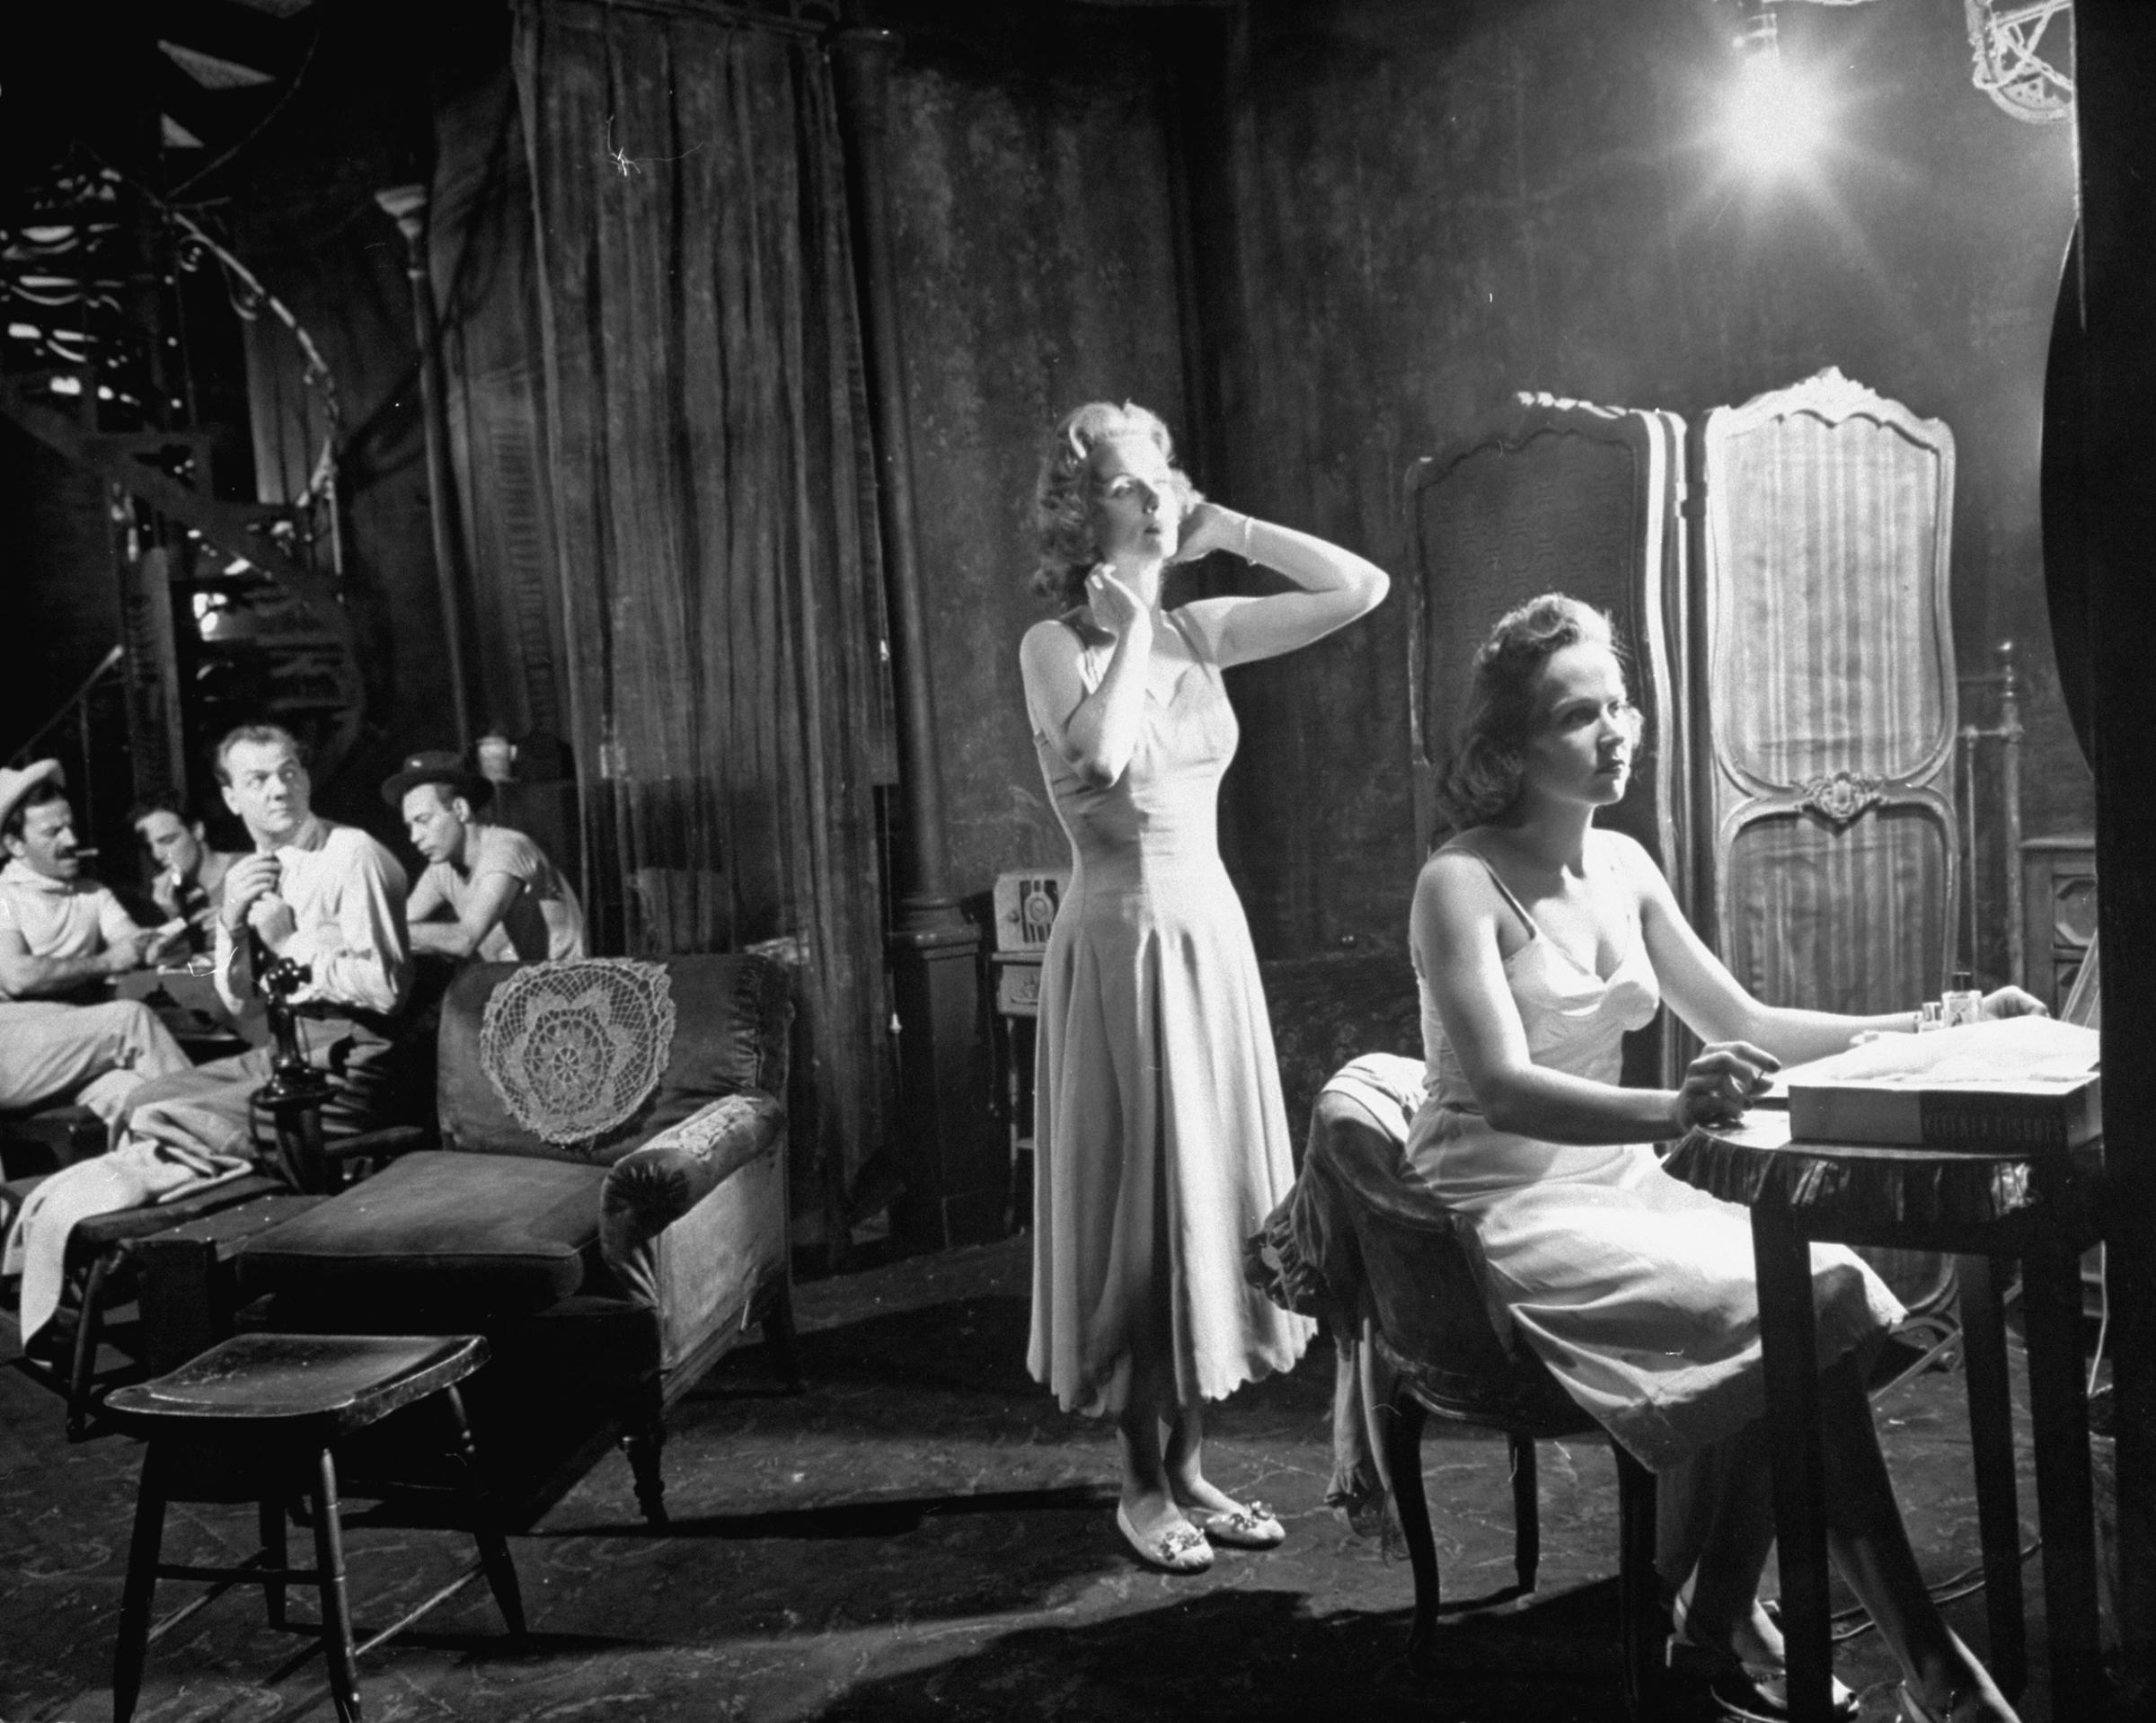 Blanche and Stella (Kim Hunter) undress in a bedroom which is divided from living room by partly closed curtains. Though Blanche complains about the noisy poker party which is going on in the adjoining room, she purposely stands so she can be seen by Mitch (Karl Malden, third from left).